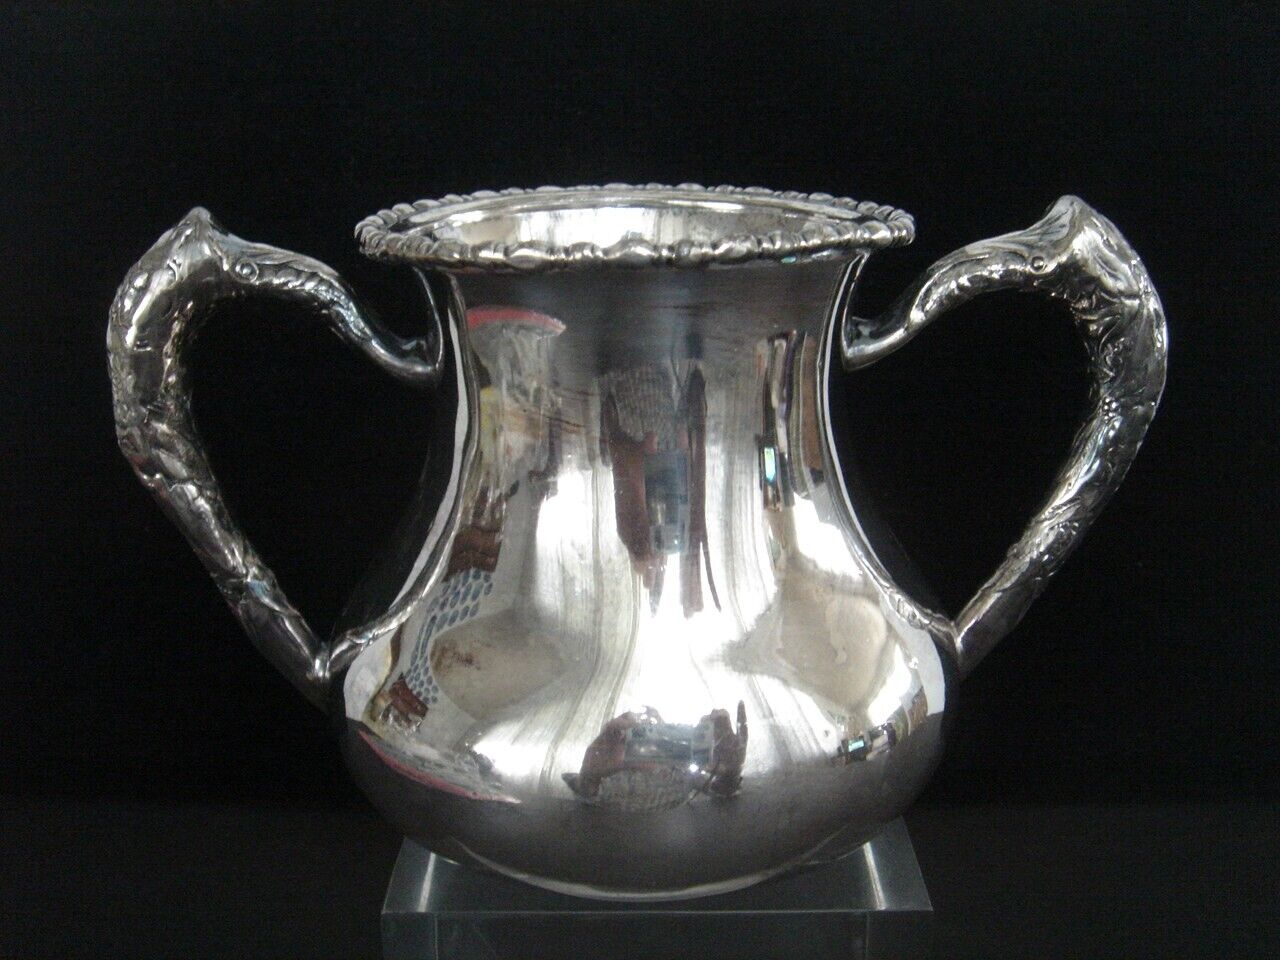 EG Webster & Son Quadruple Silver Plated Waste Bowl Double Handle Made in USA